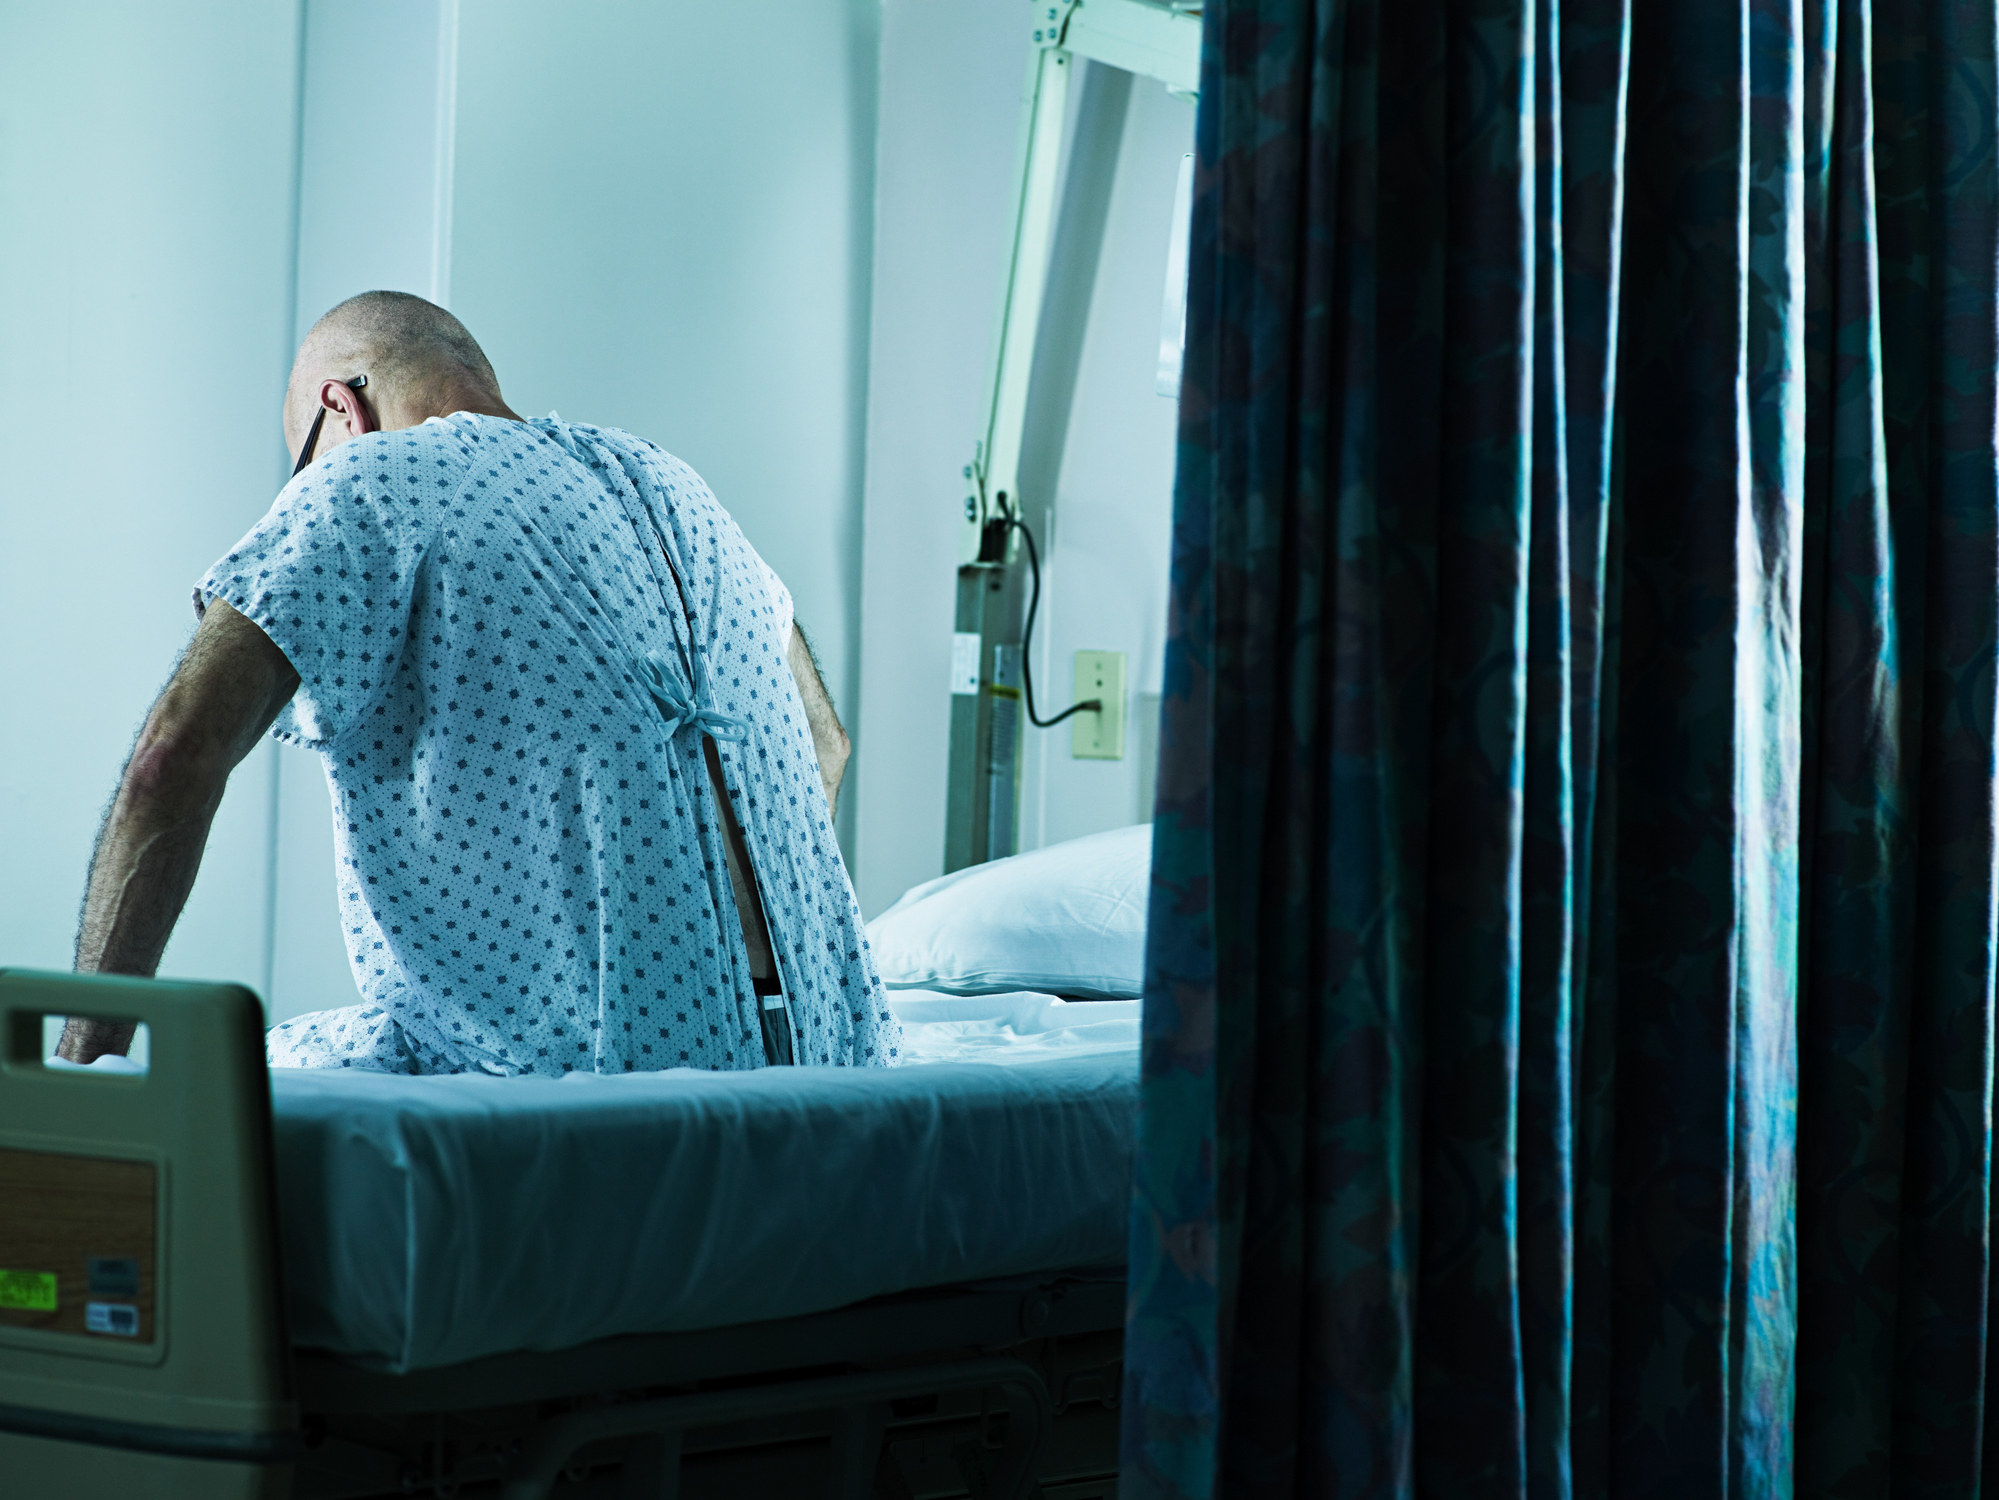 A person sitting in a hospital bed